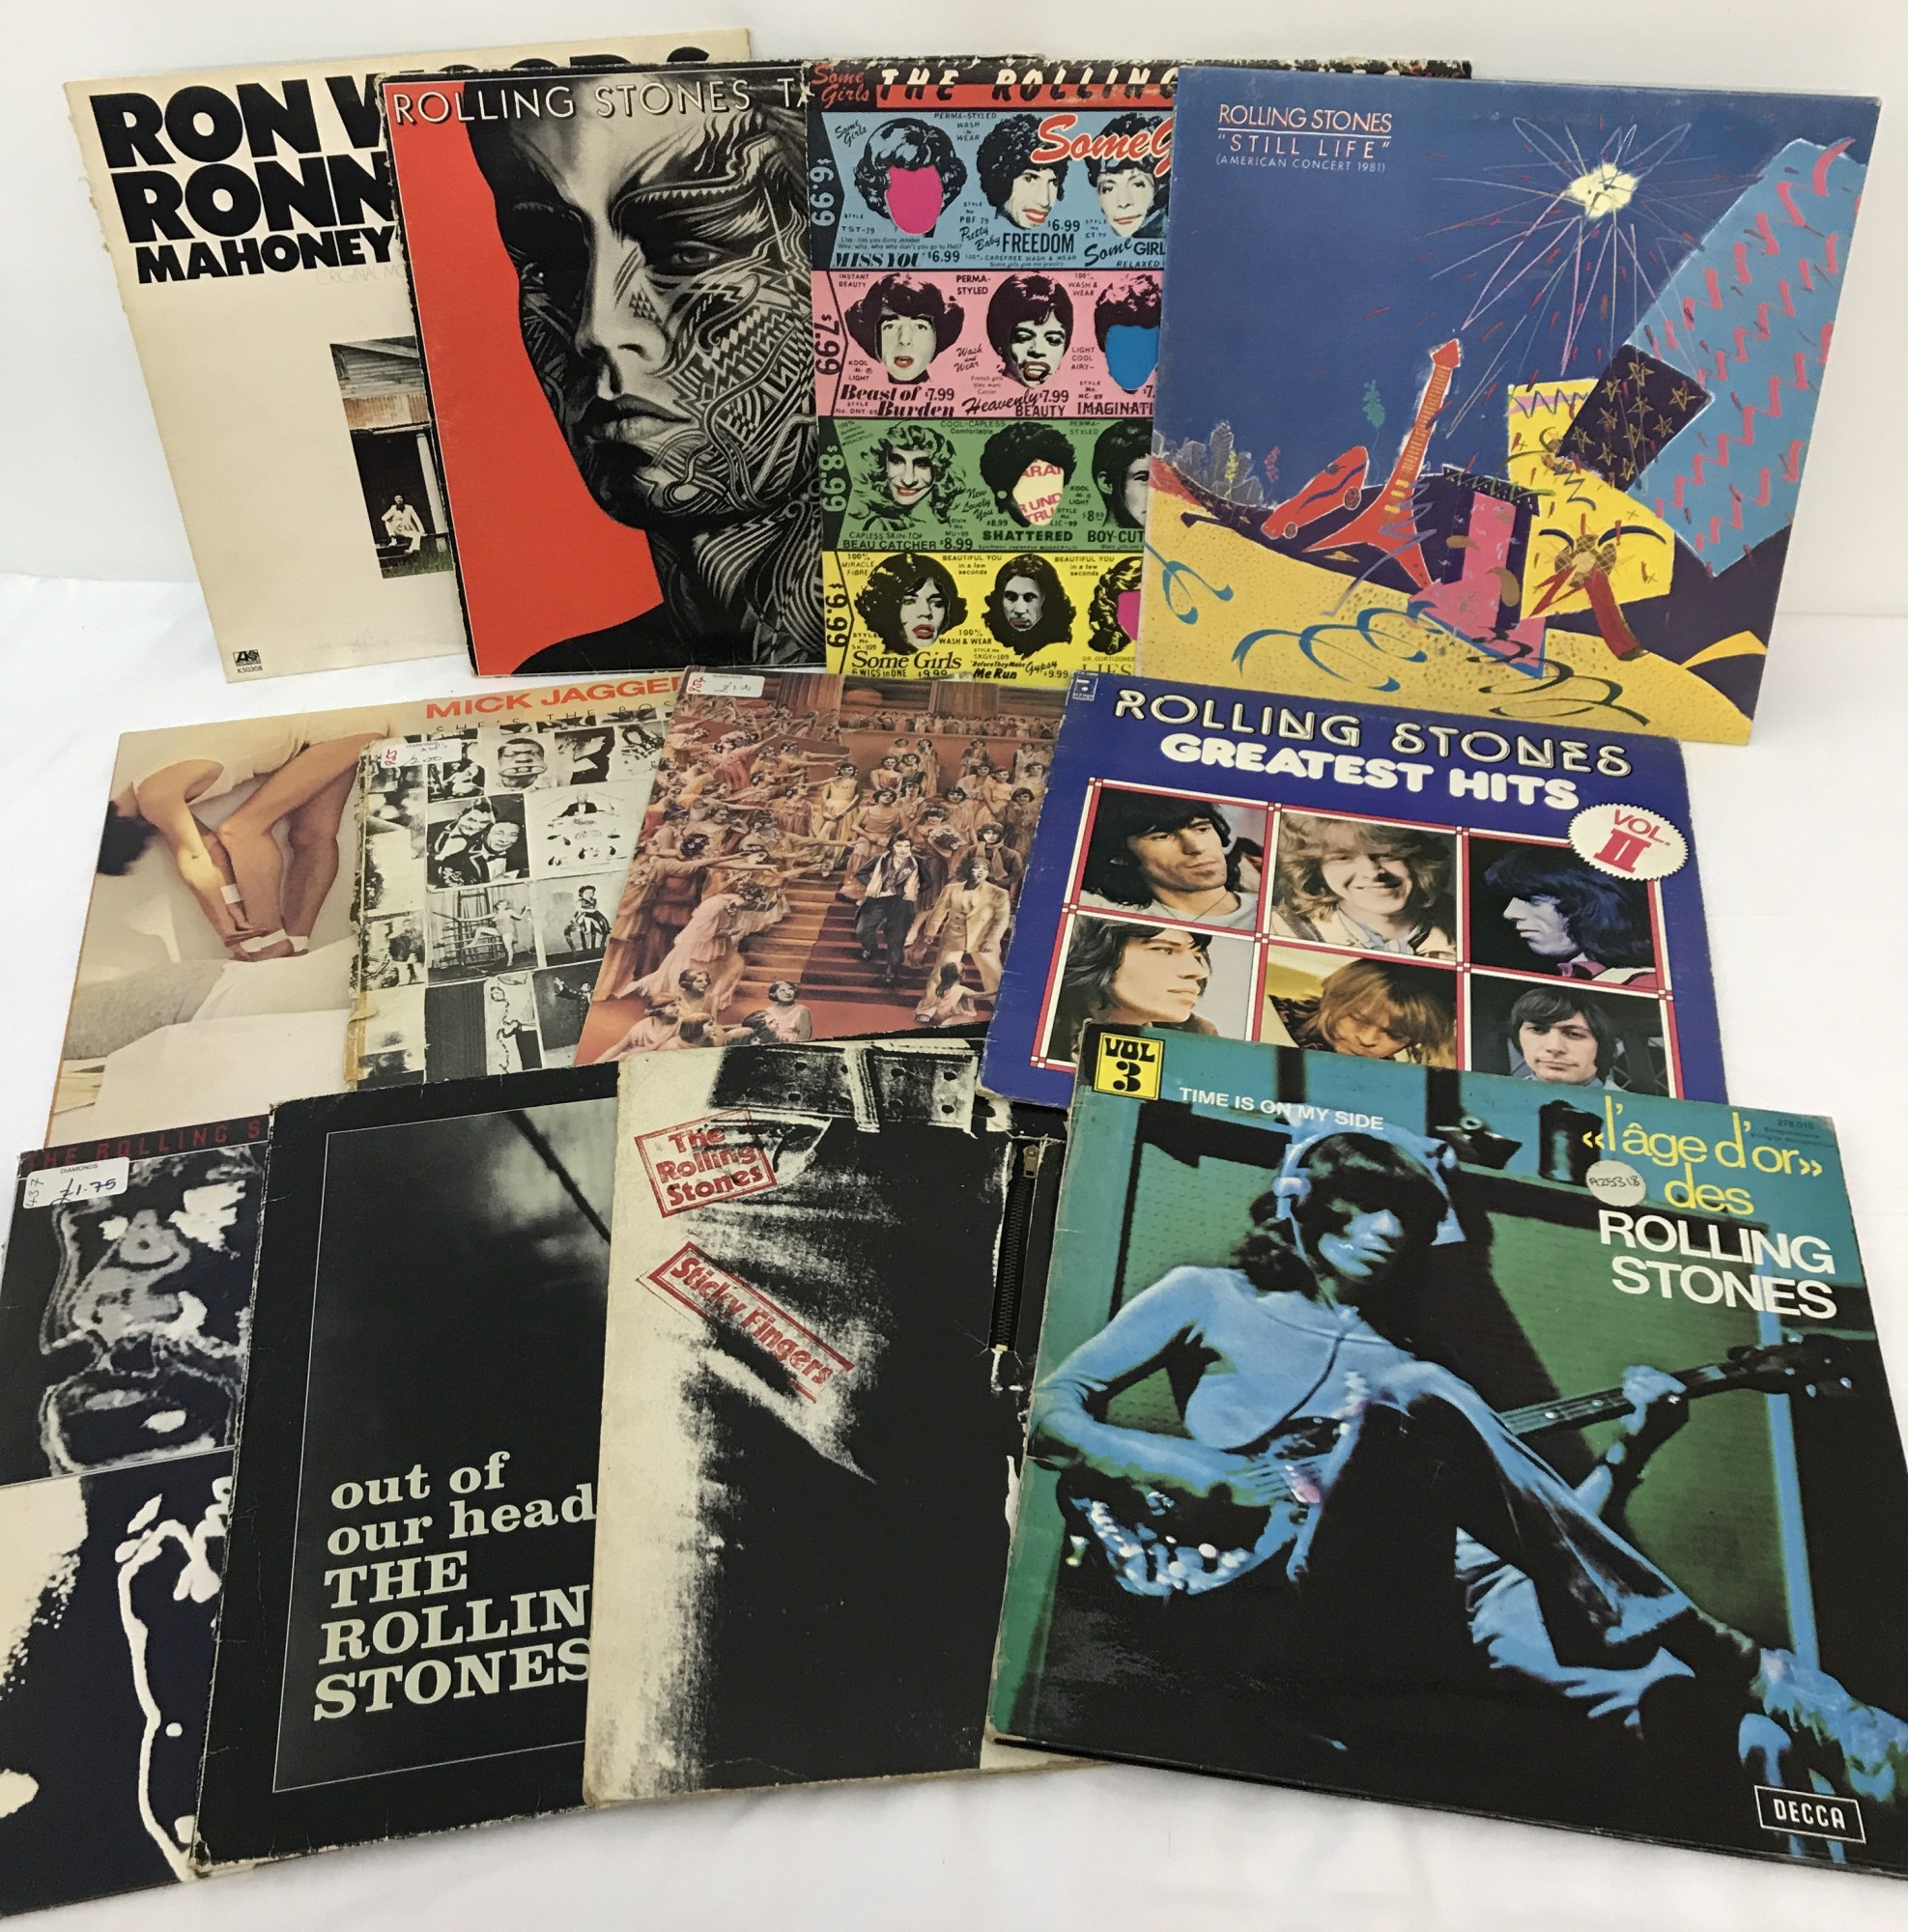 12 vintage Rolling Stones LP's - to include solo albums from Rolling Stones band members.